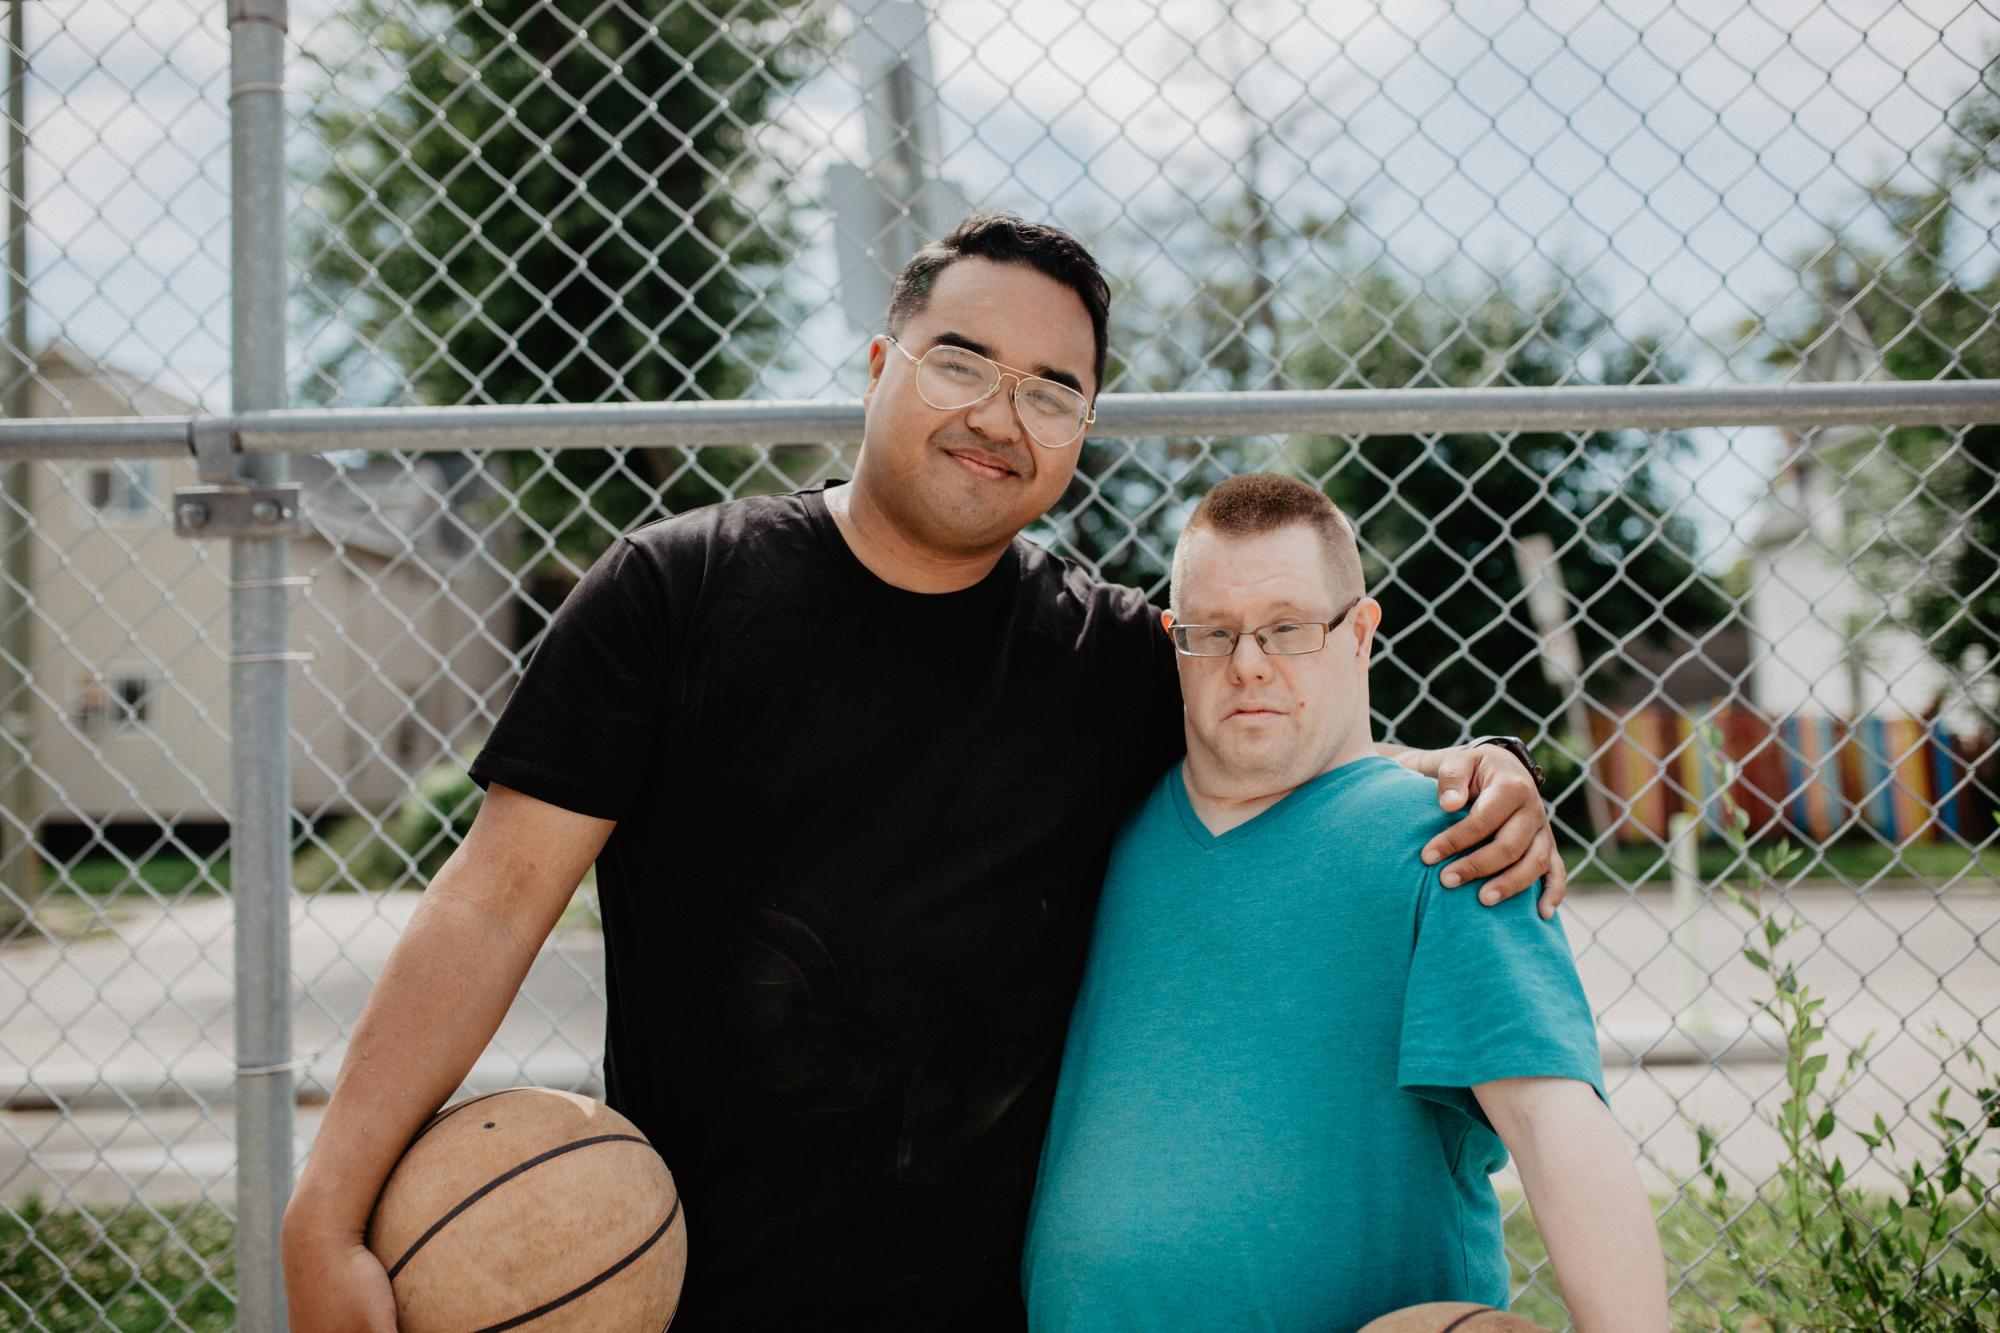 Jose and Cory smiling in front of a basketball court